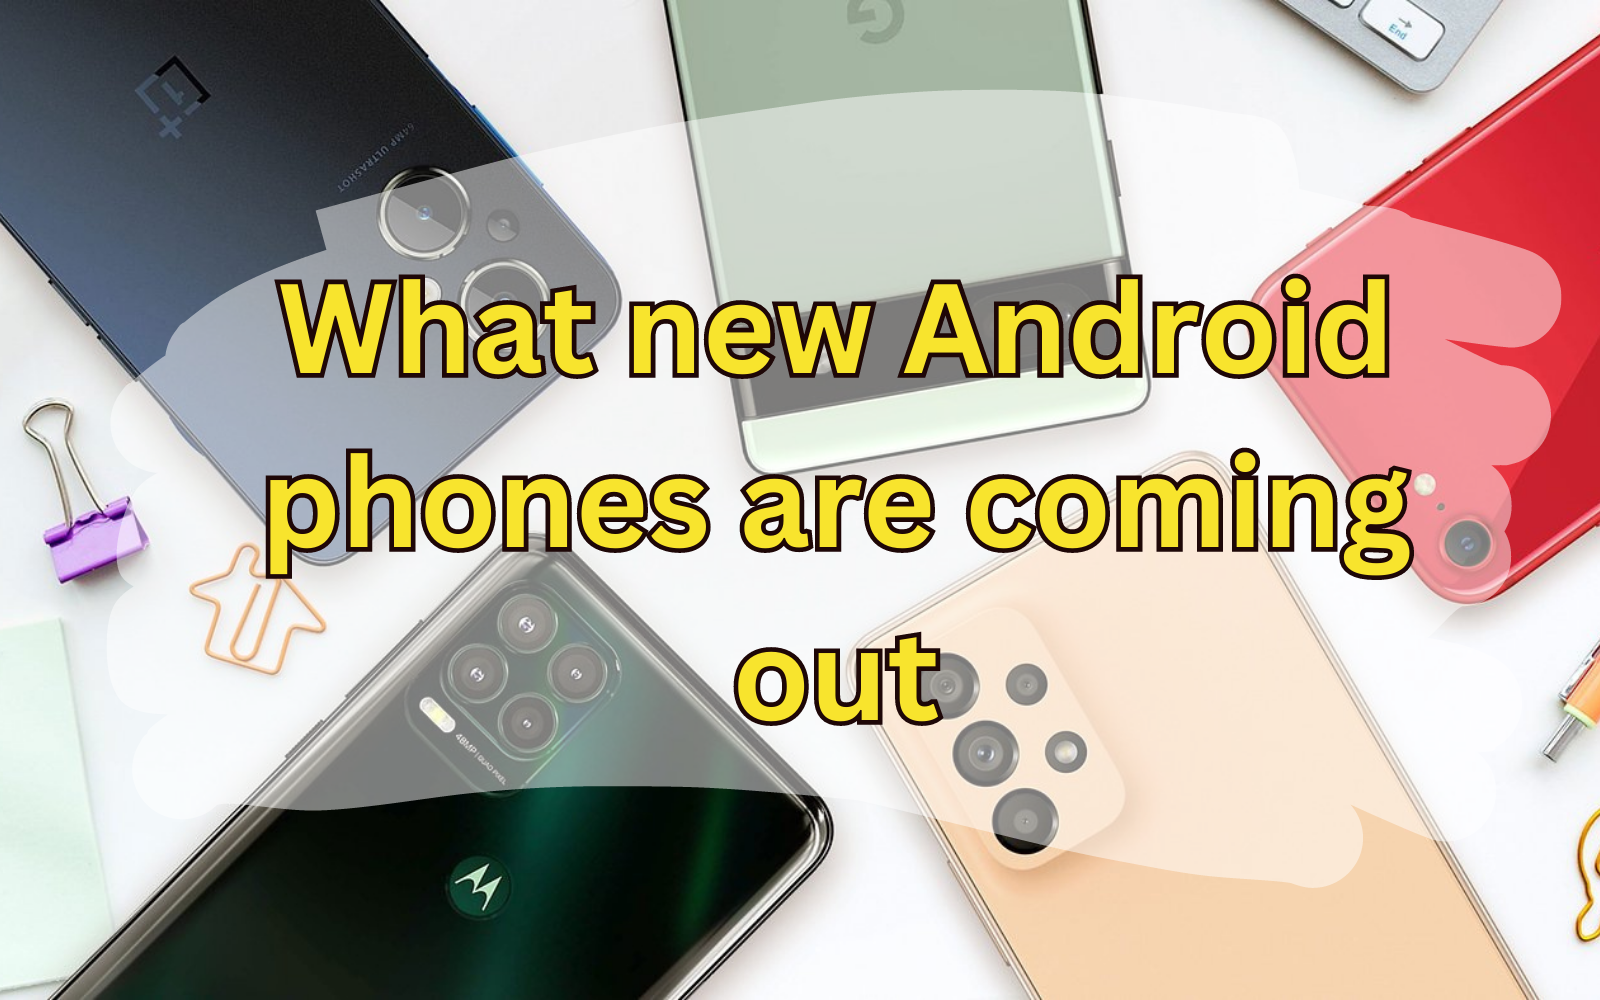 What new Android phones are coming out